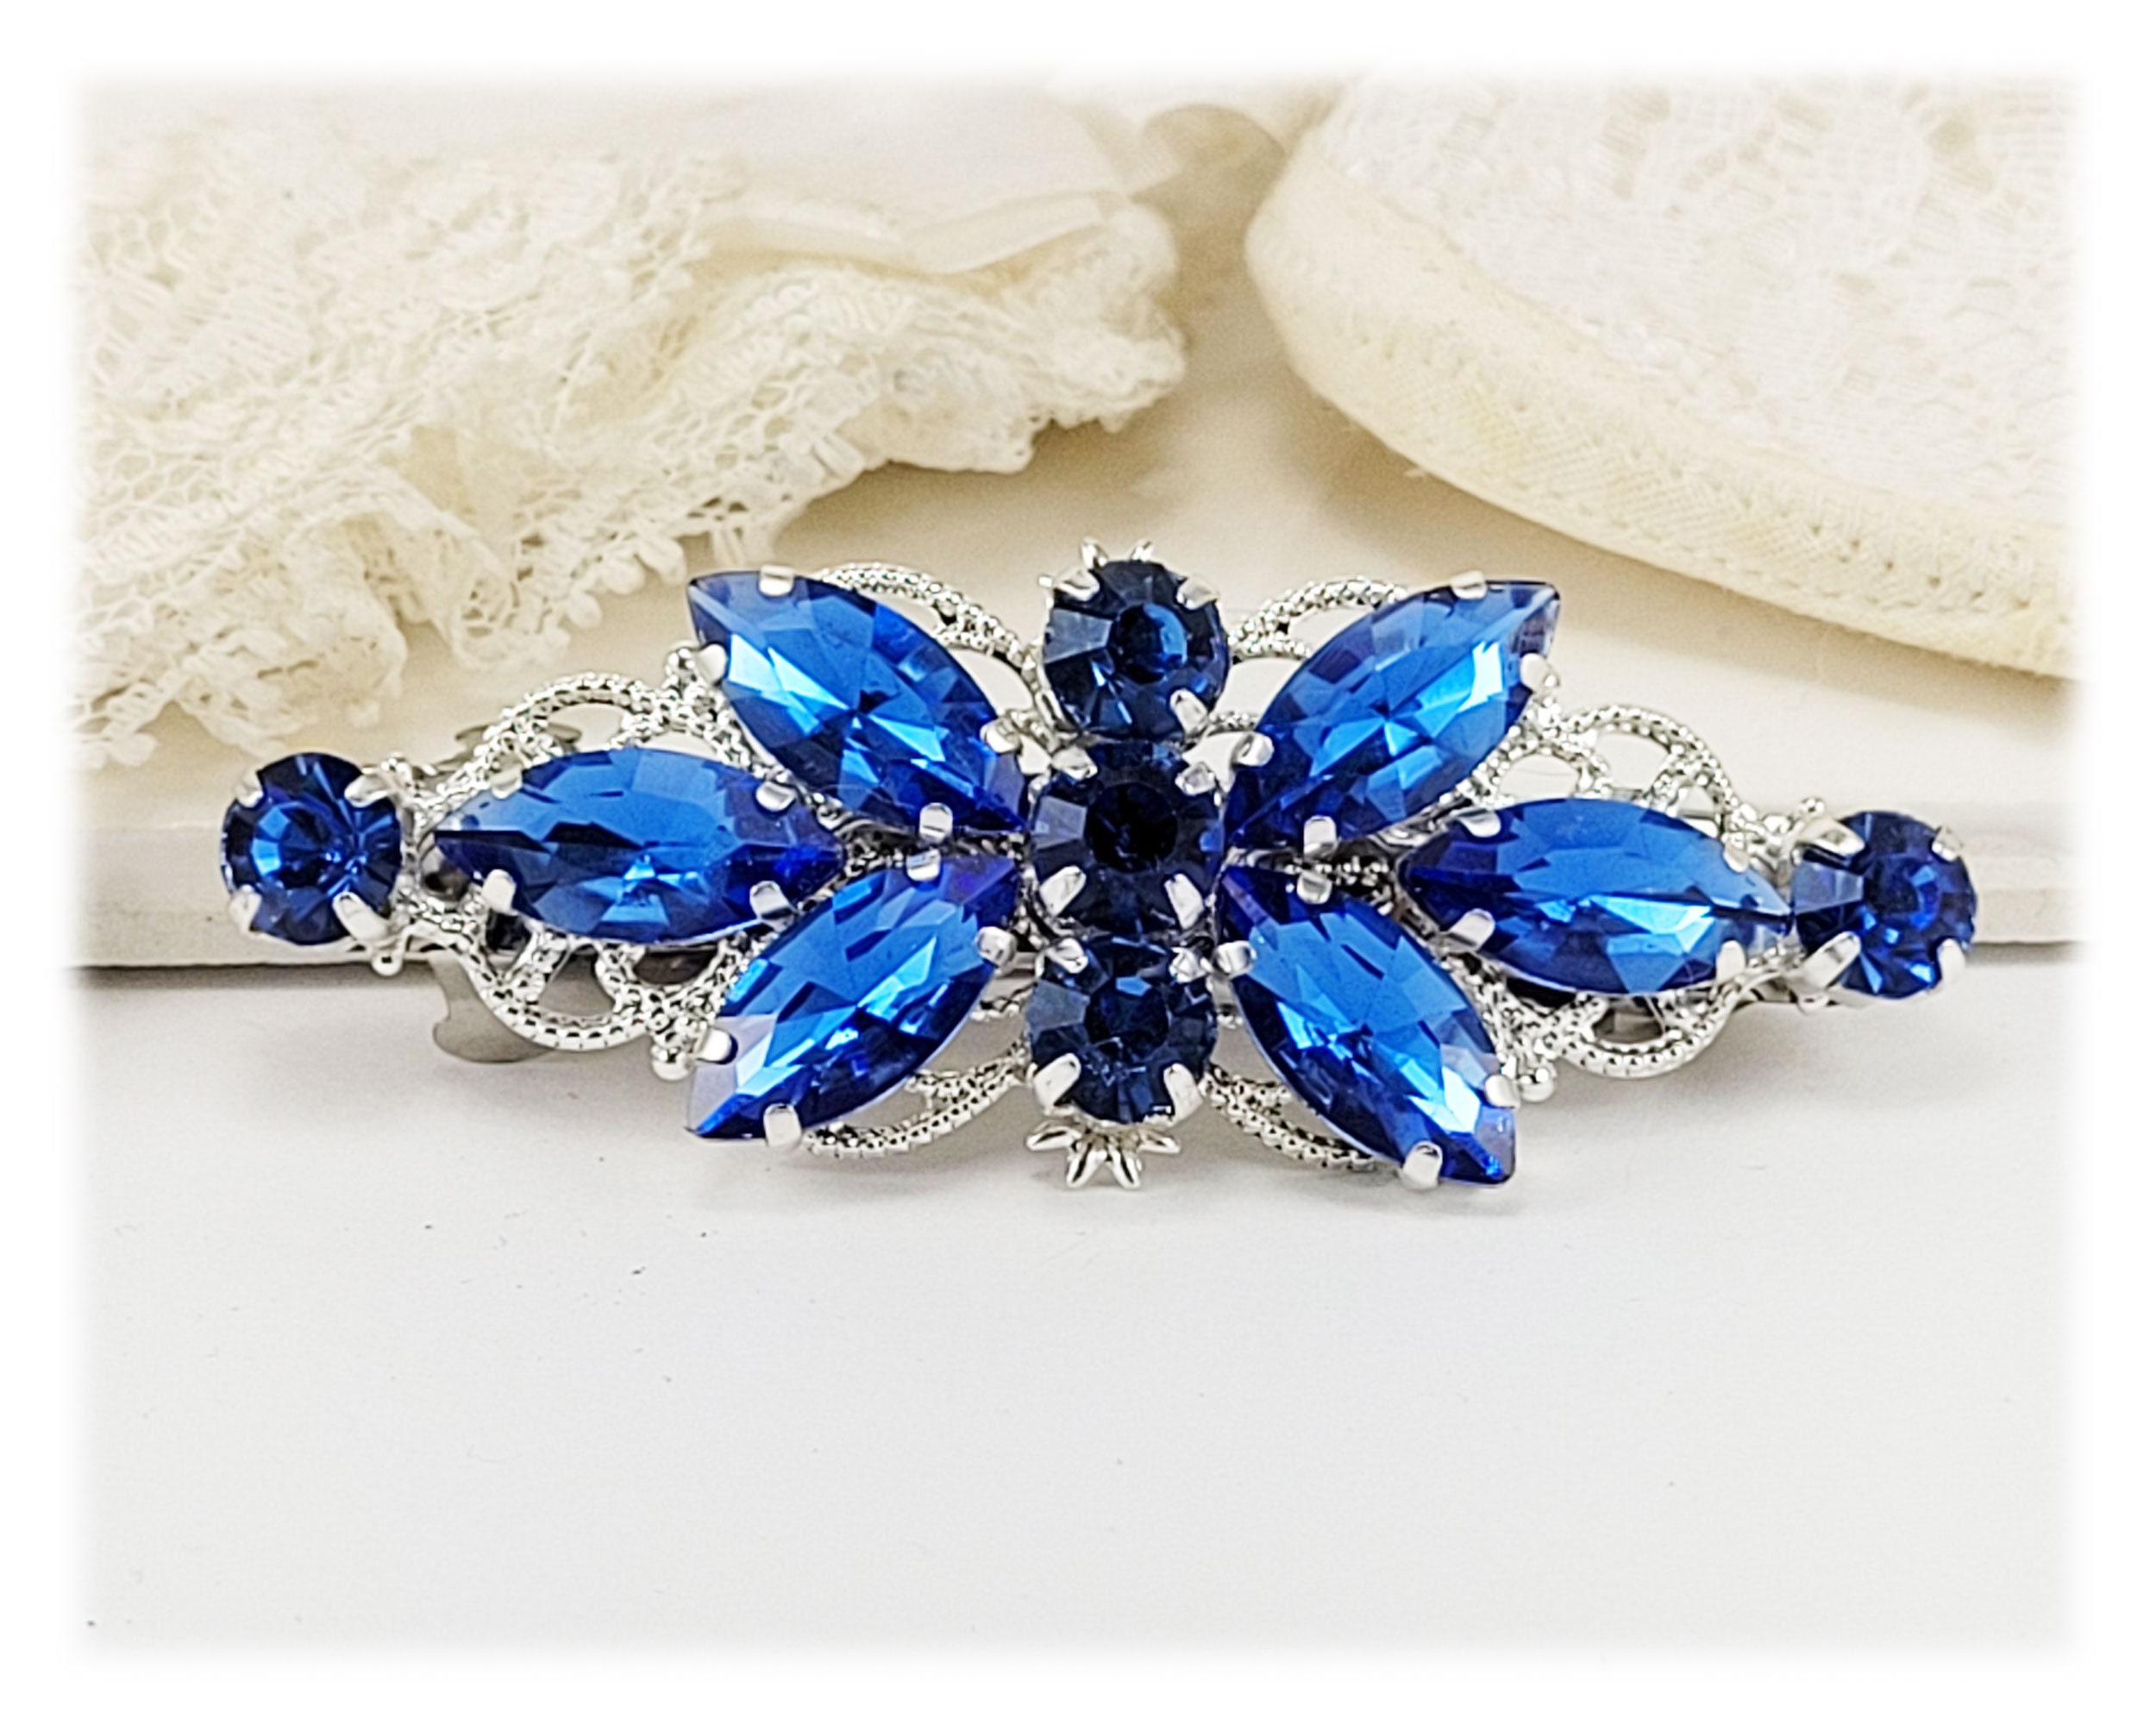 Blue Crystal Hair Accessories - wide 6